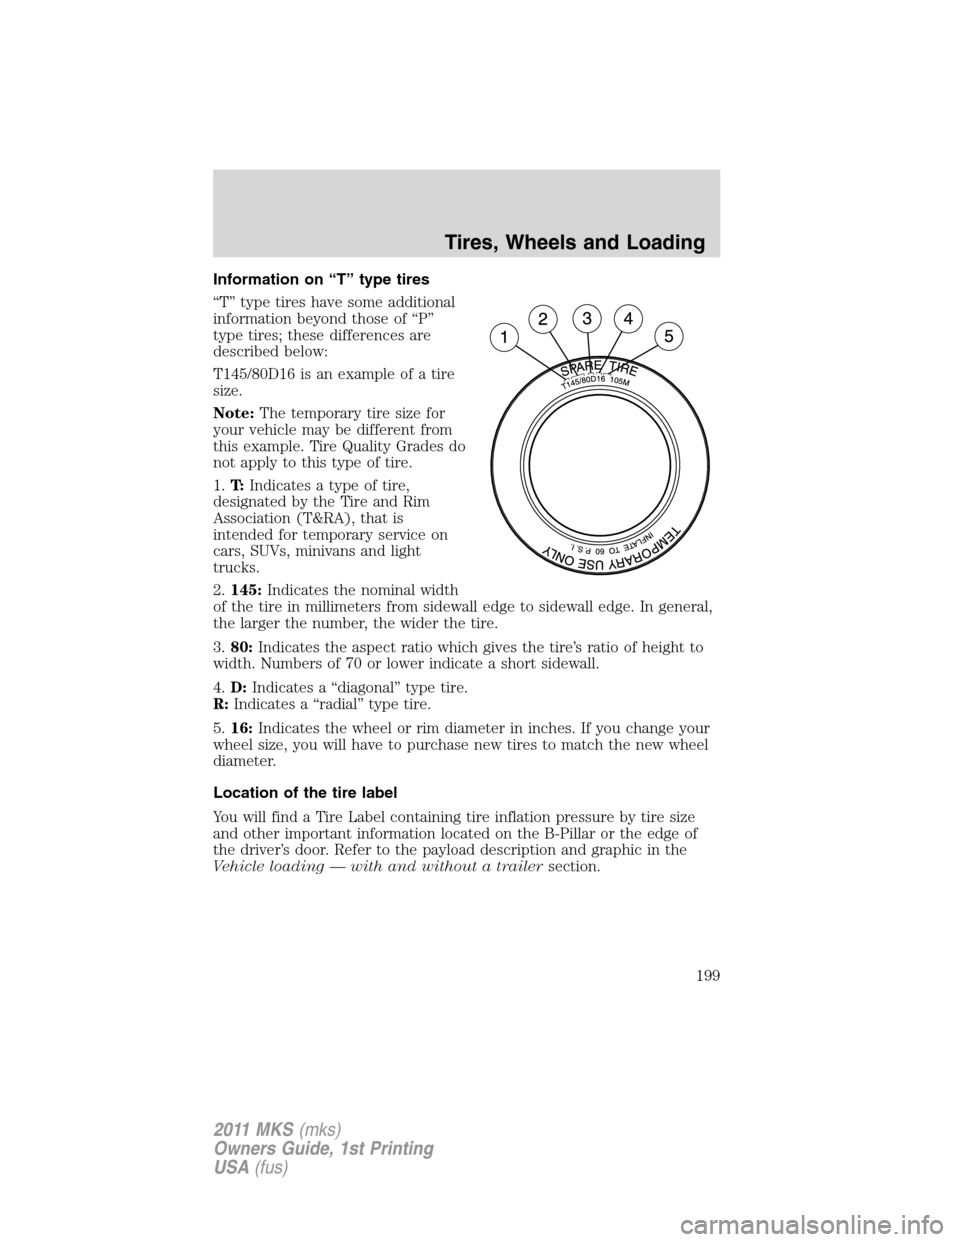 LINCOLN MKS 2011  Owners Manual Information on “T” type tires
“T” type tires have some additional
information beyond those of “P”
type tires; these differences are
described below:
T145/80D16 is an example of a tire
size